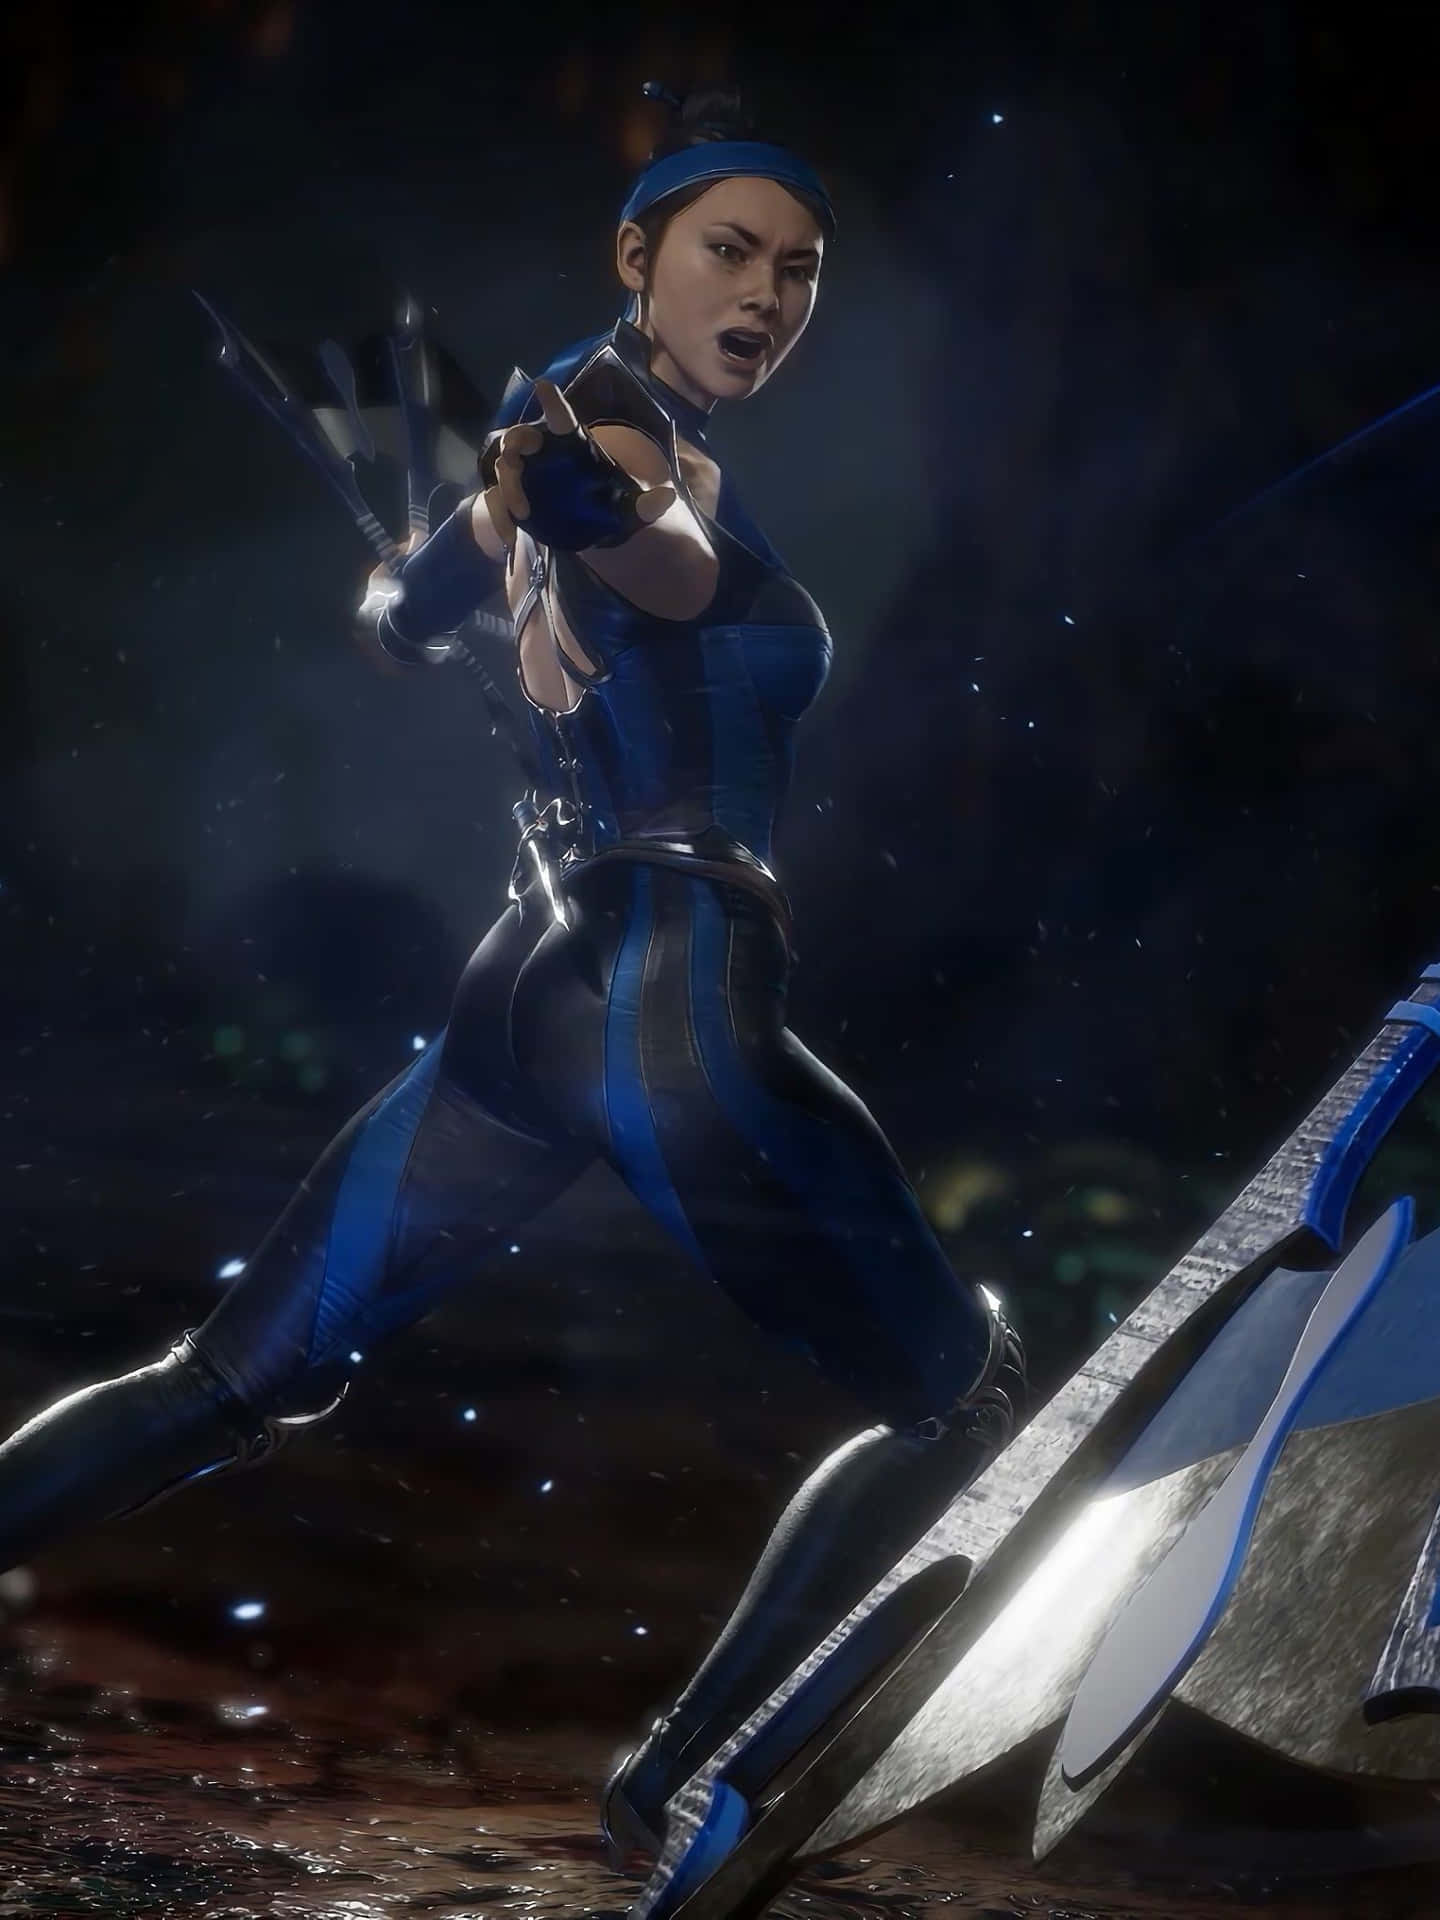 The fierce and skilled princess, Kitana, wielding her iconic fans in Mortal Kombat. Wallpaper